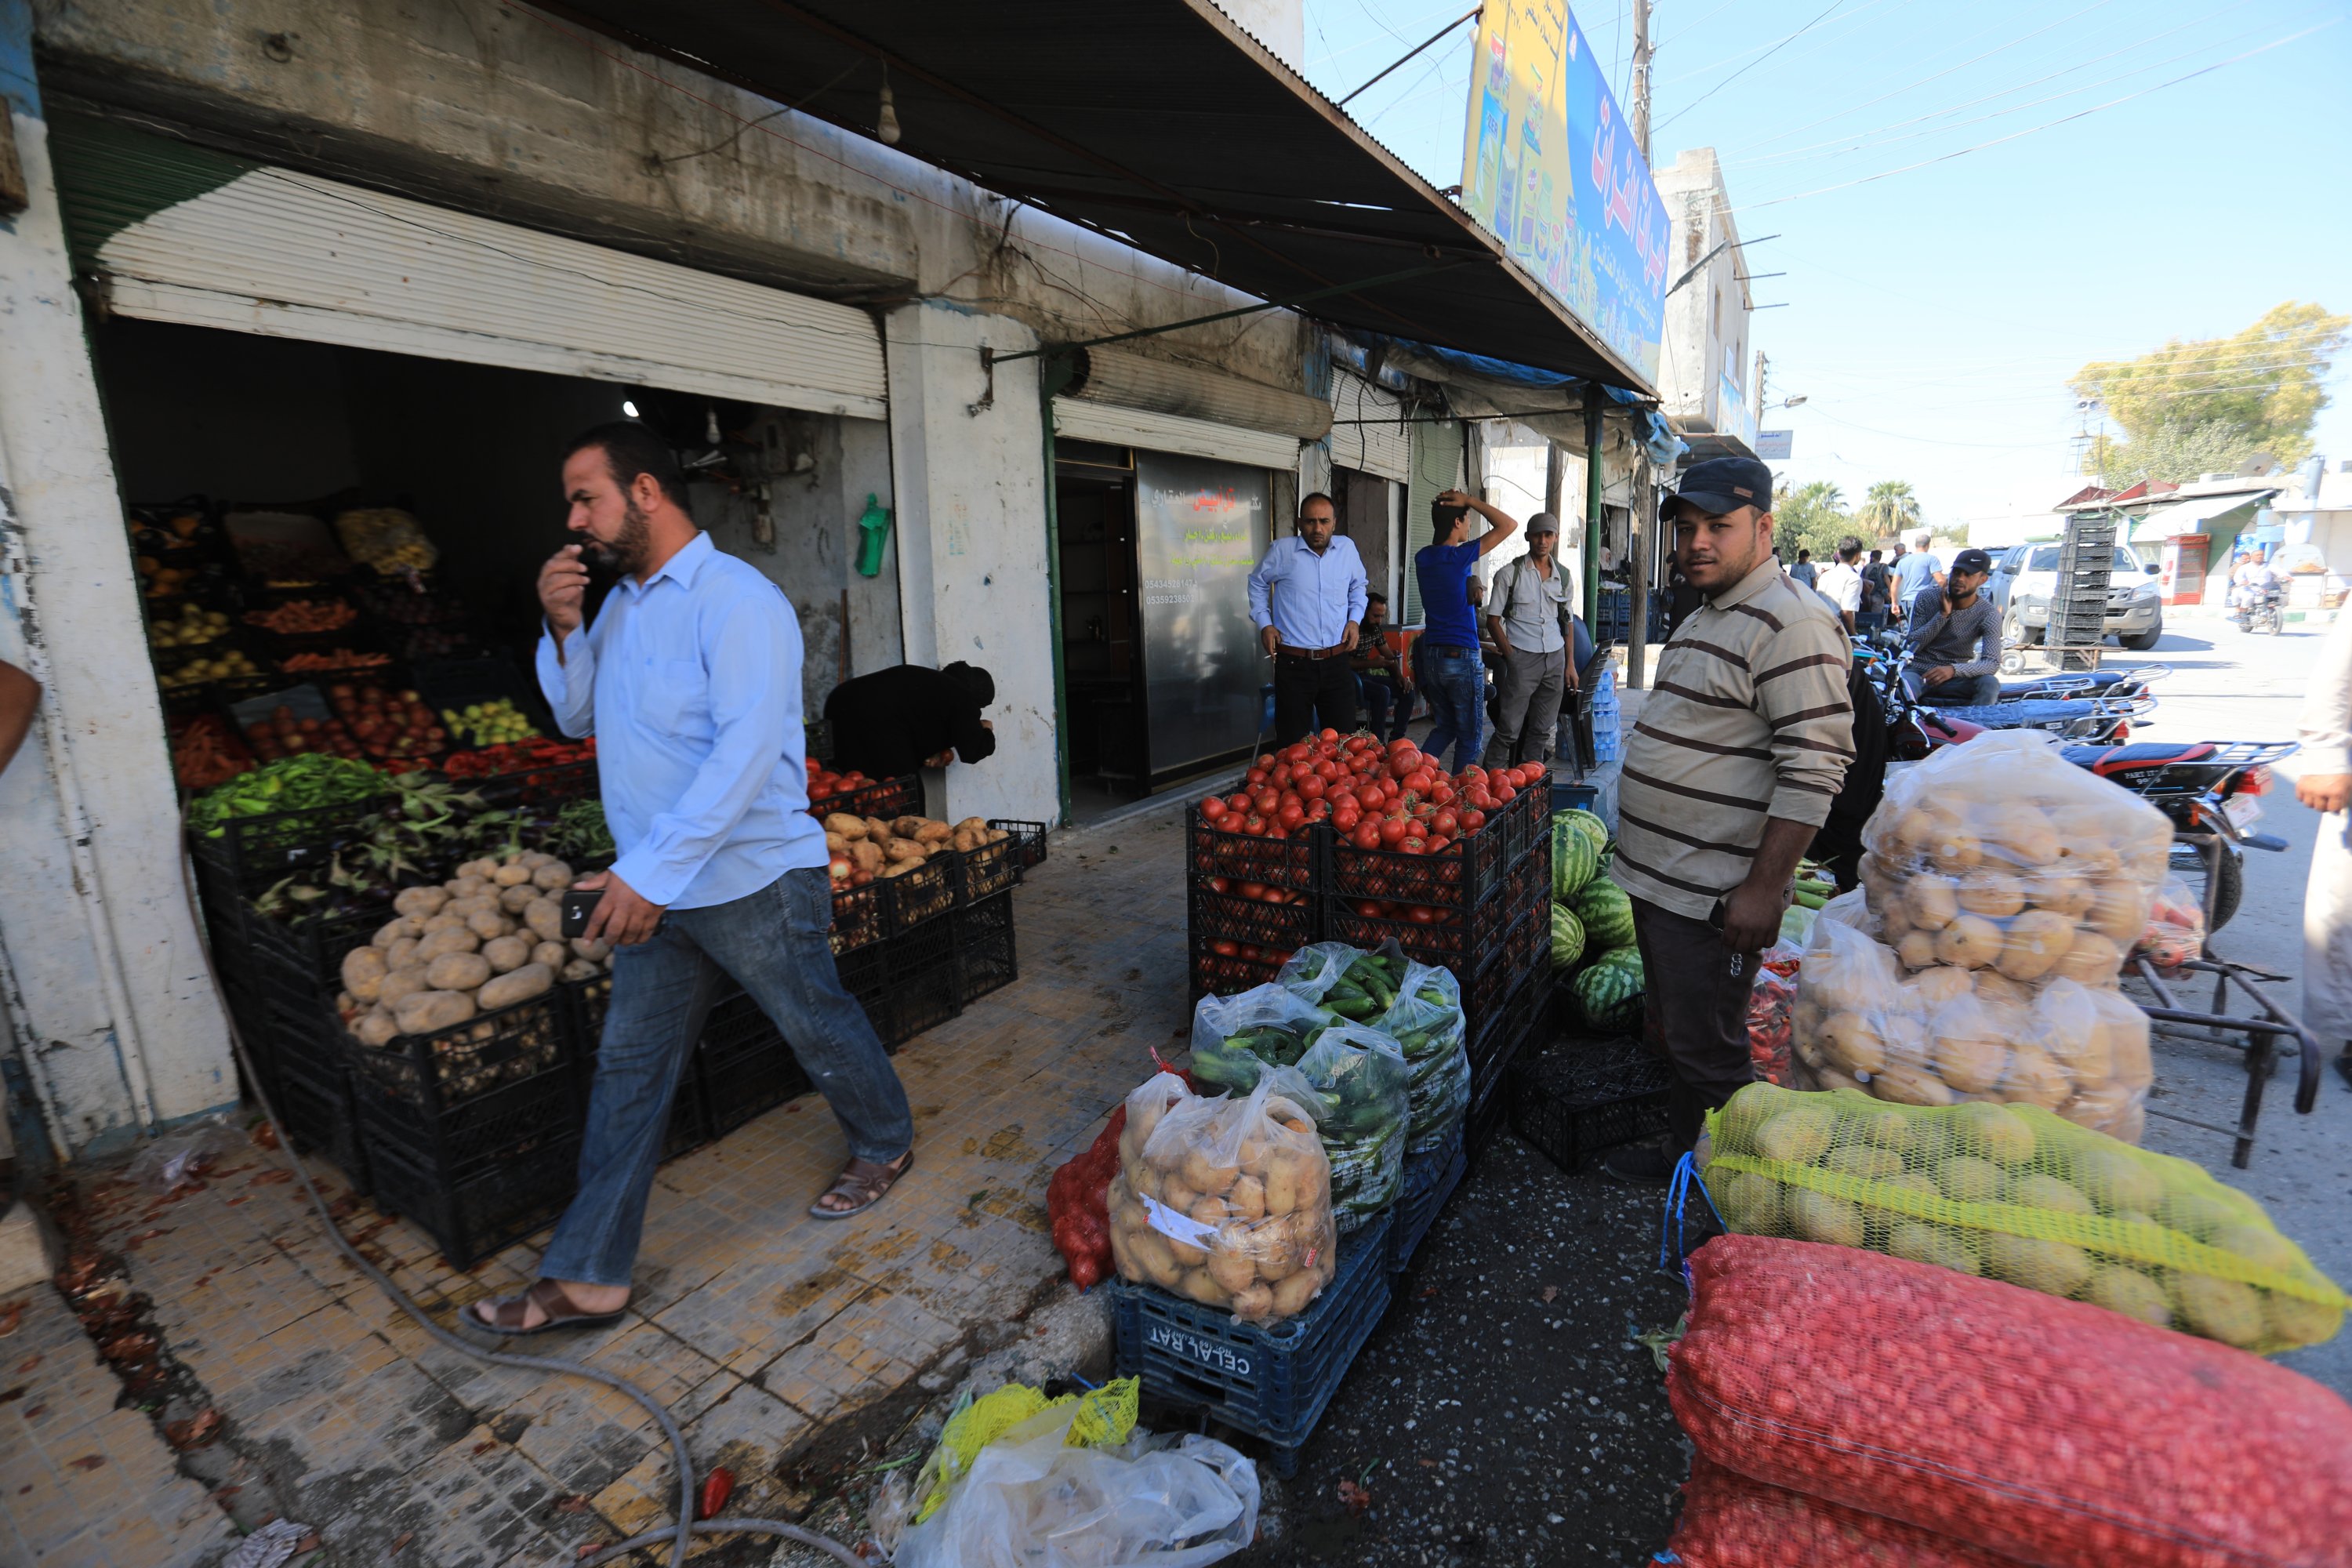 People walk through the bazaar in central Tal Abyad, Syria, Oct. 8, 2020. (AA Photo)